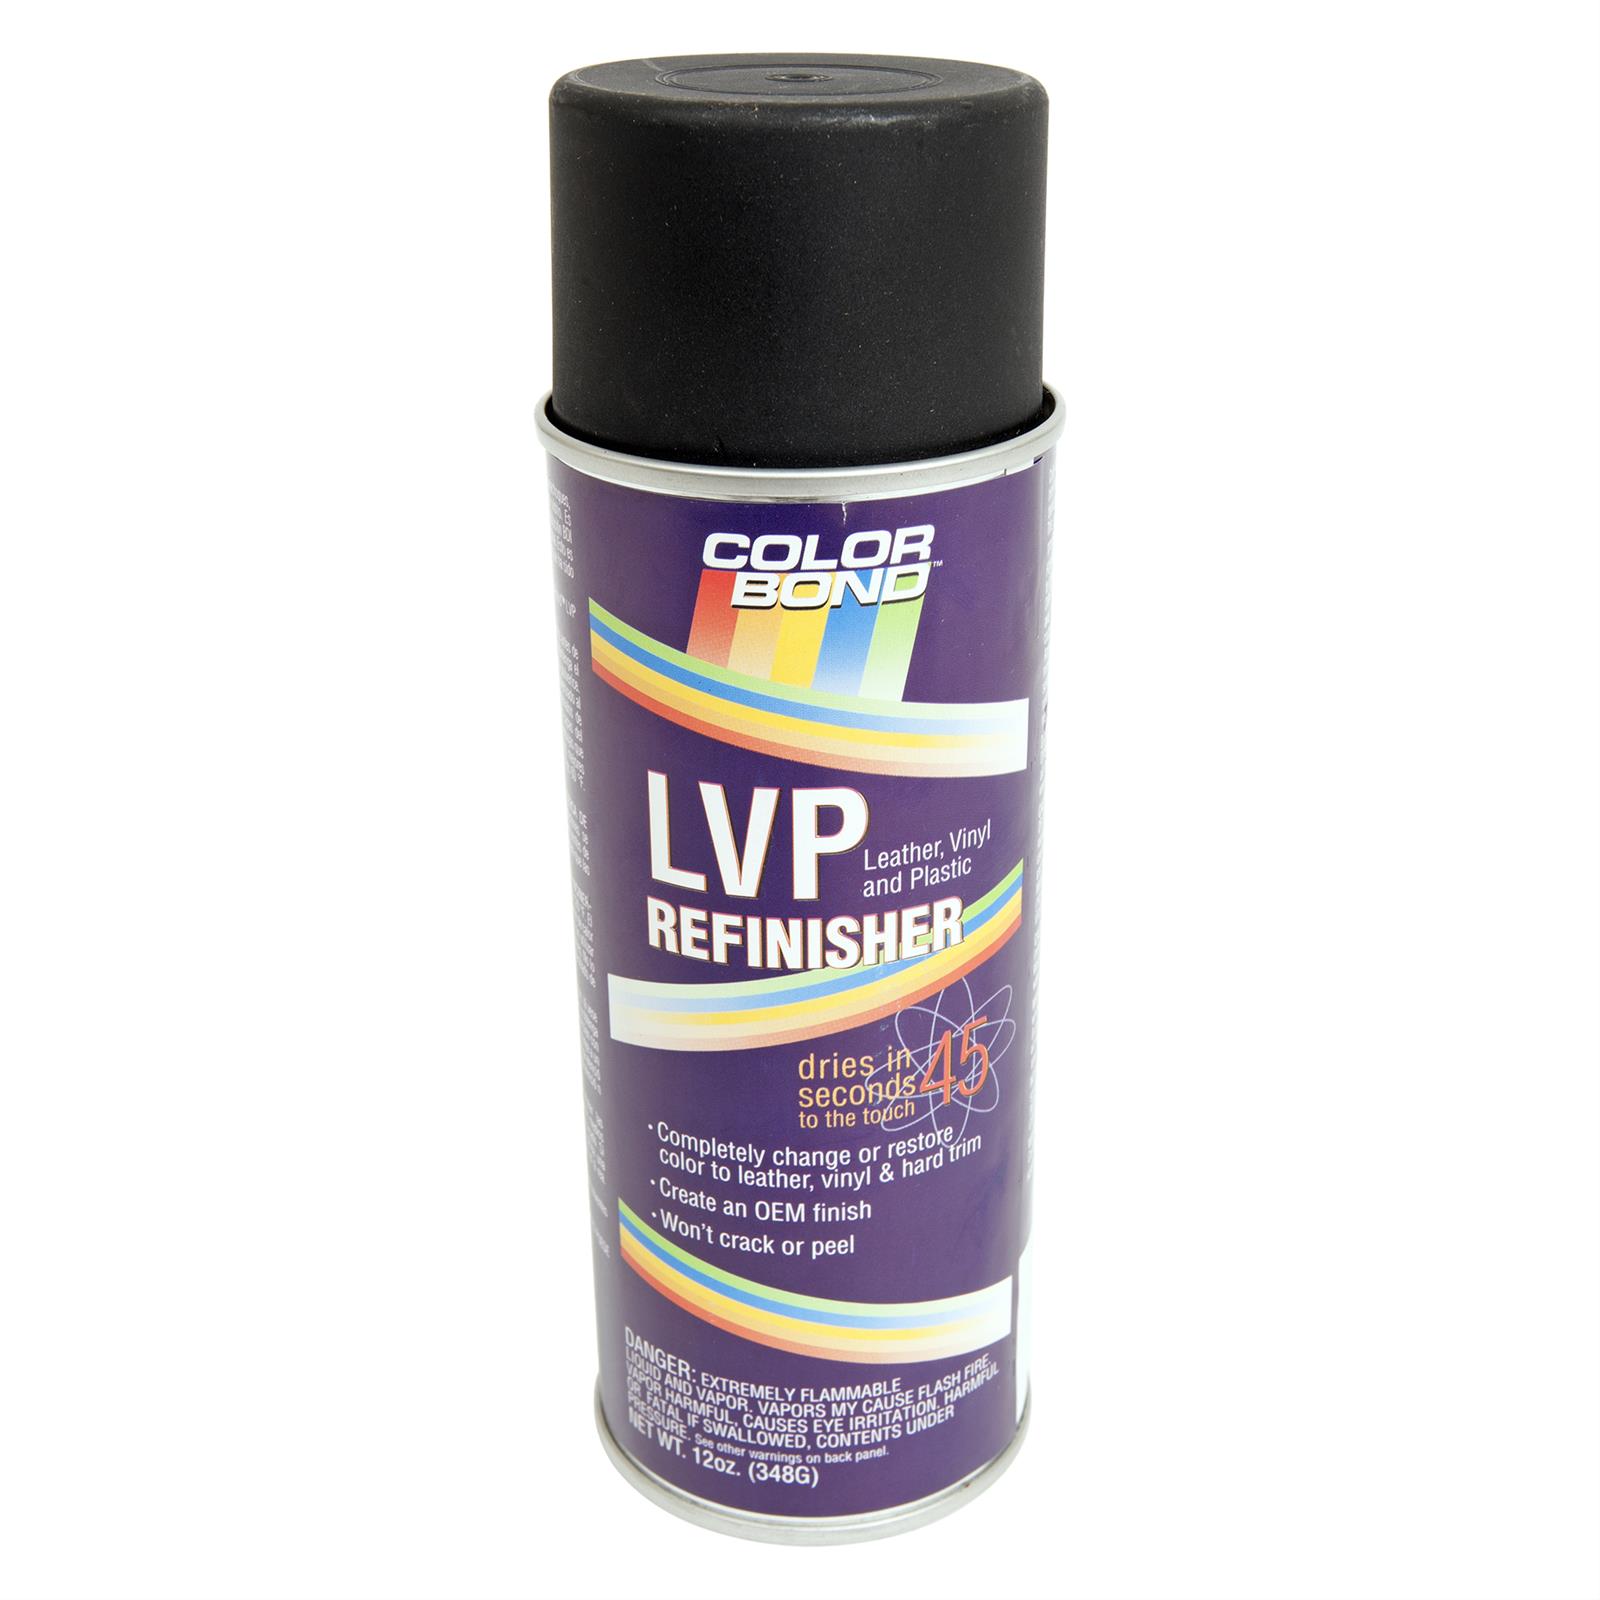 Colorbond 3010 Colorbond Leather, Plastic, and Vinyl Refinisher